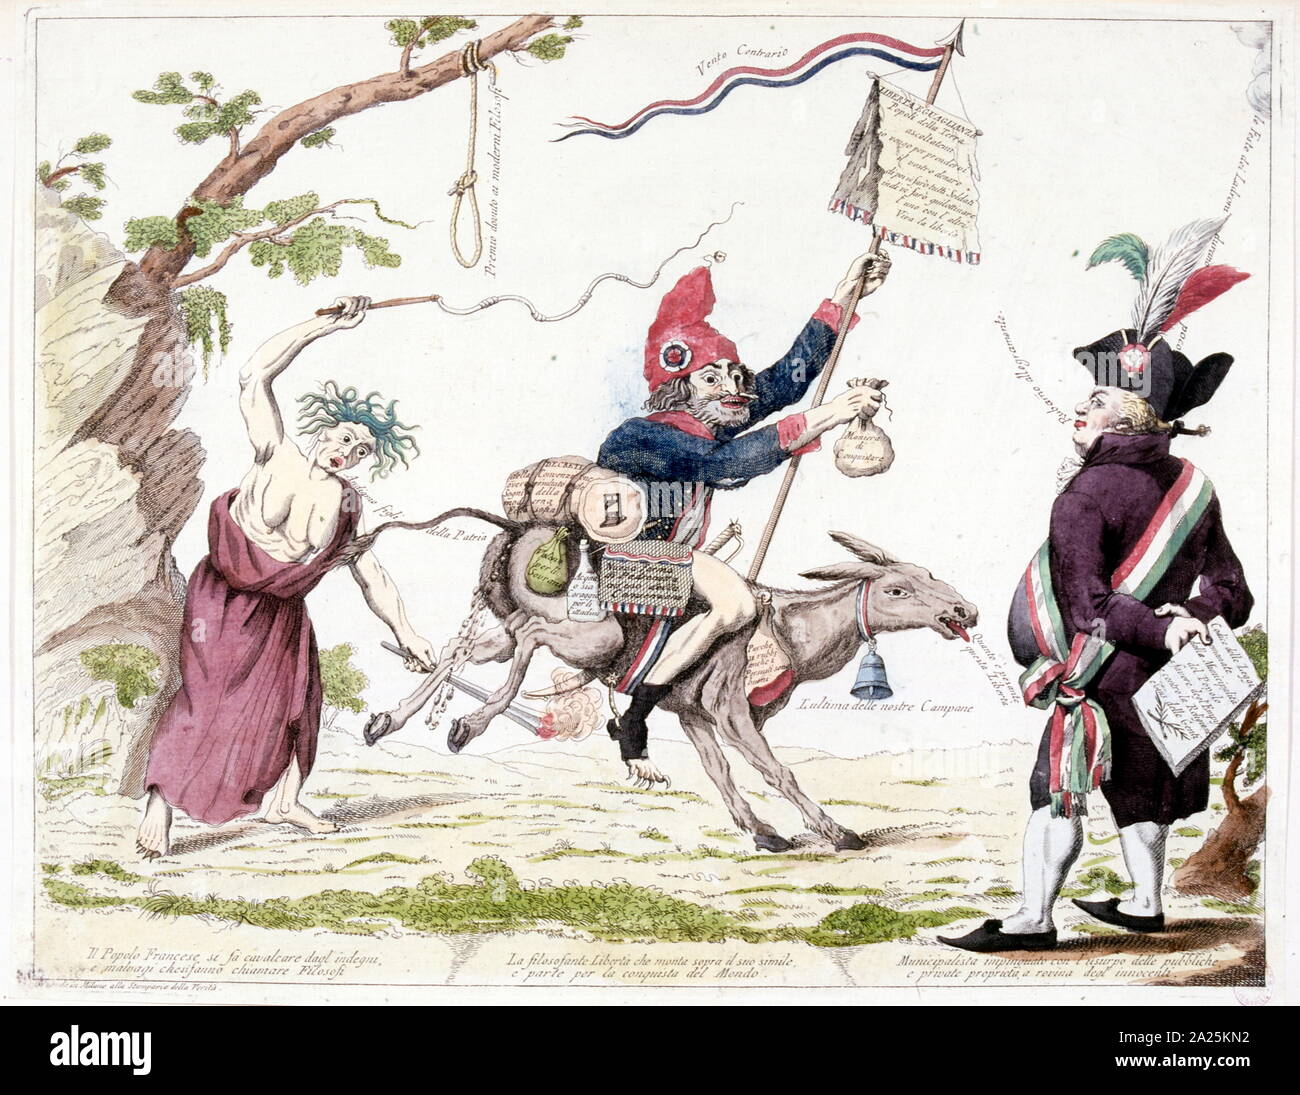 Illustration satirising aspects of class divide during the French Revolution 1795 Stock Photo